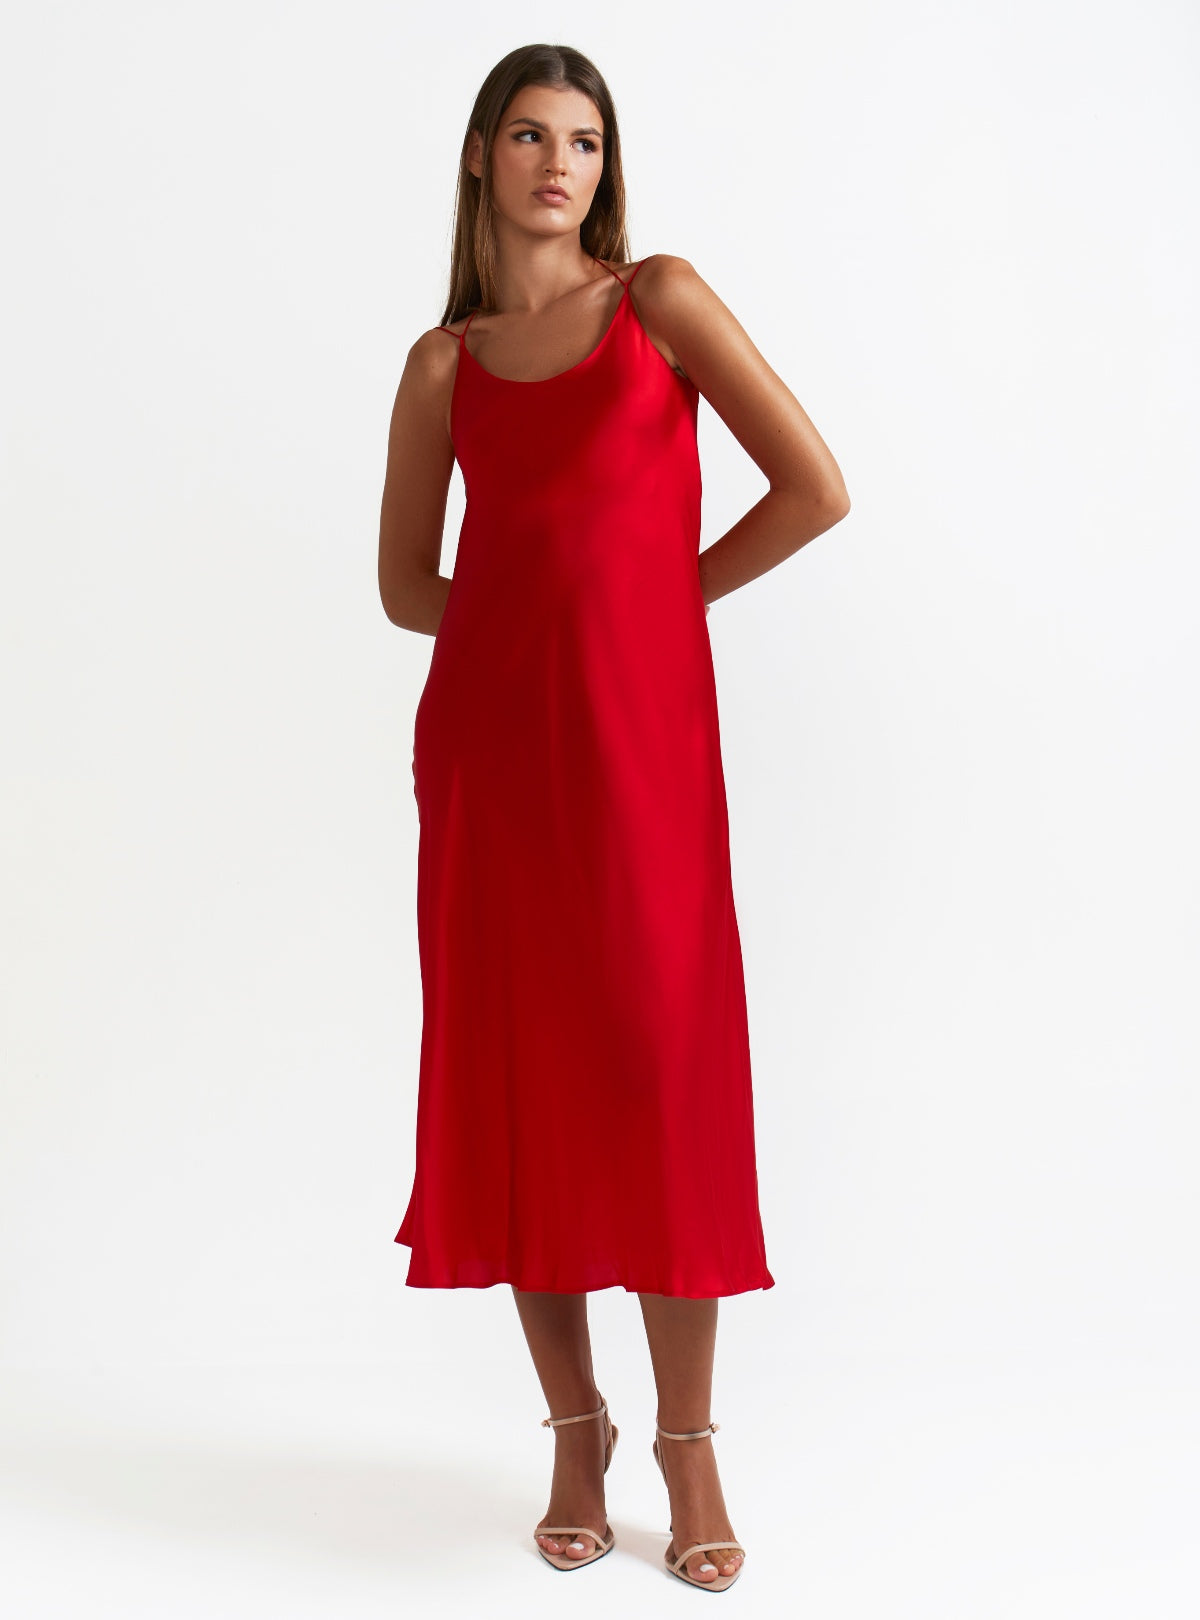 RED SLIP DRESS WITH LOW BACK